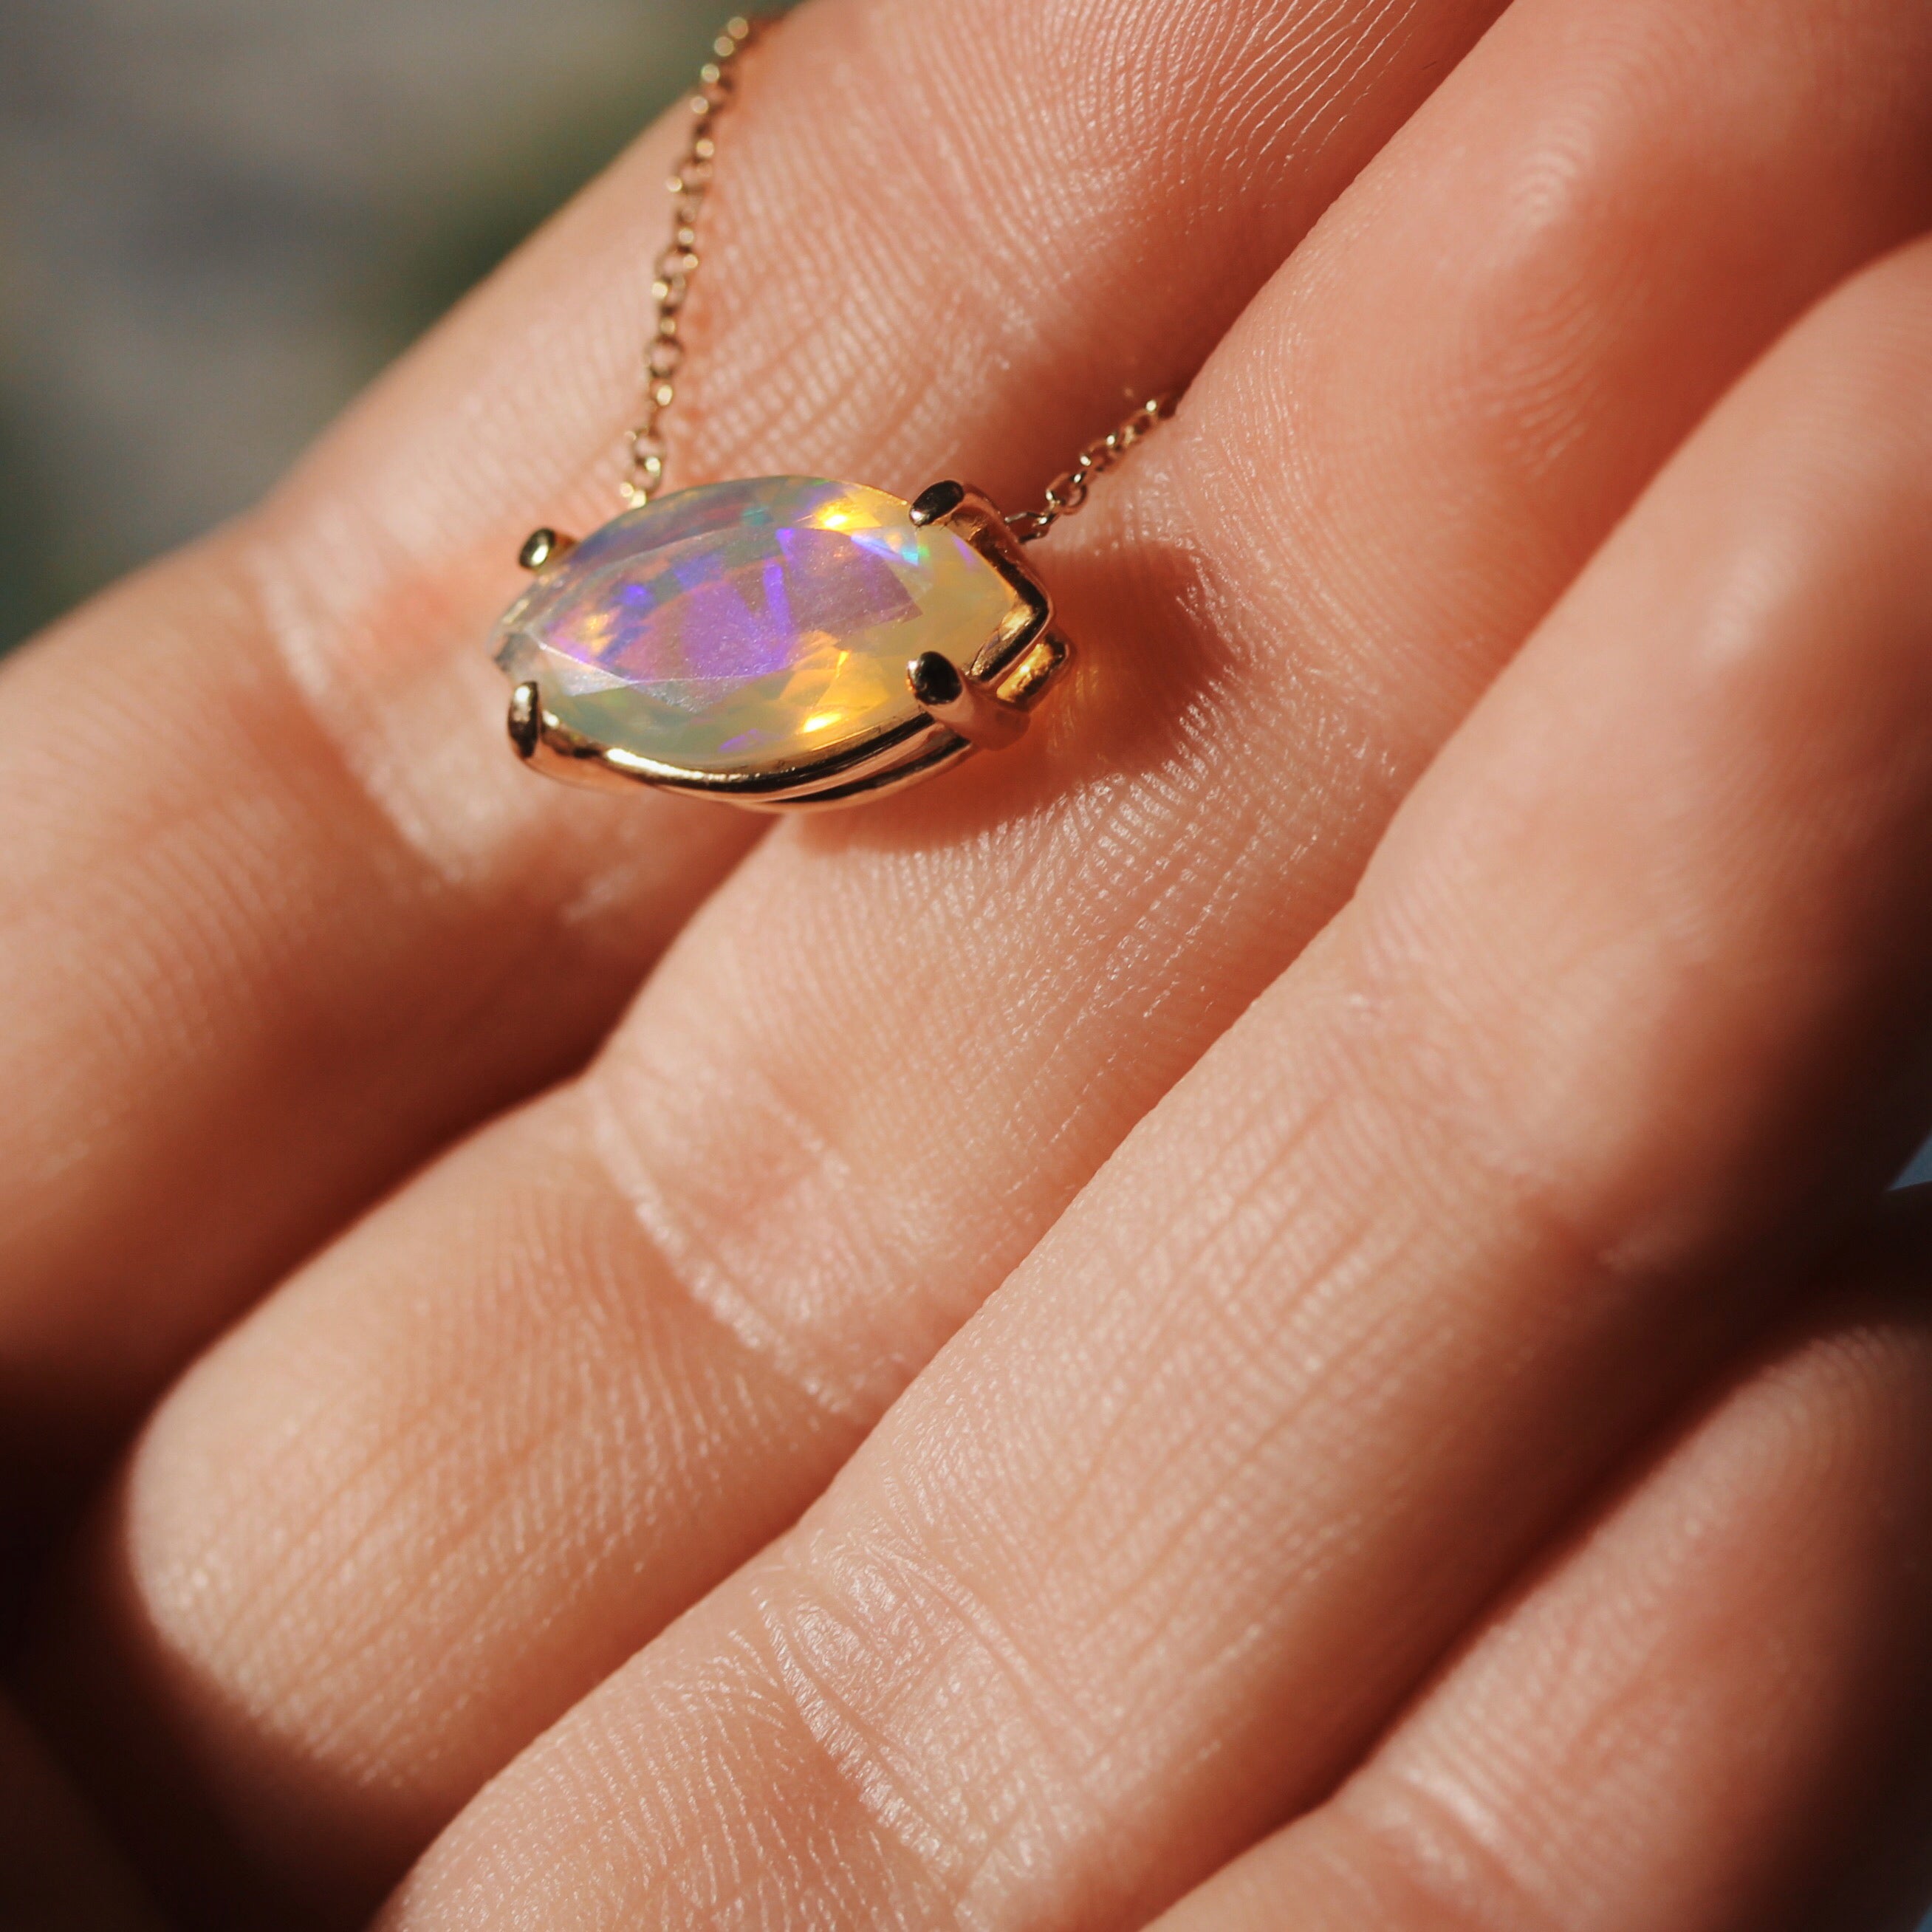 Solitaire Marquise Opal Necklace